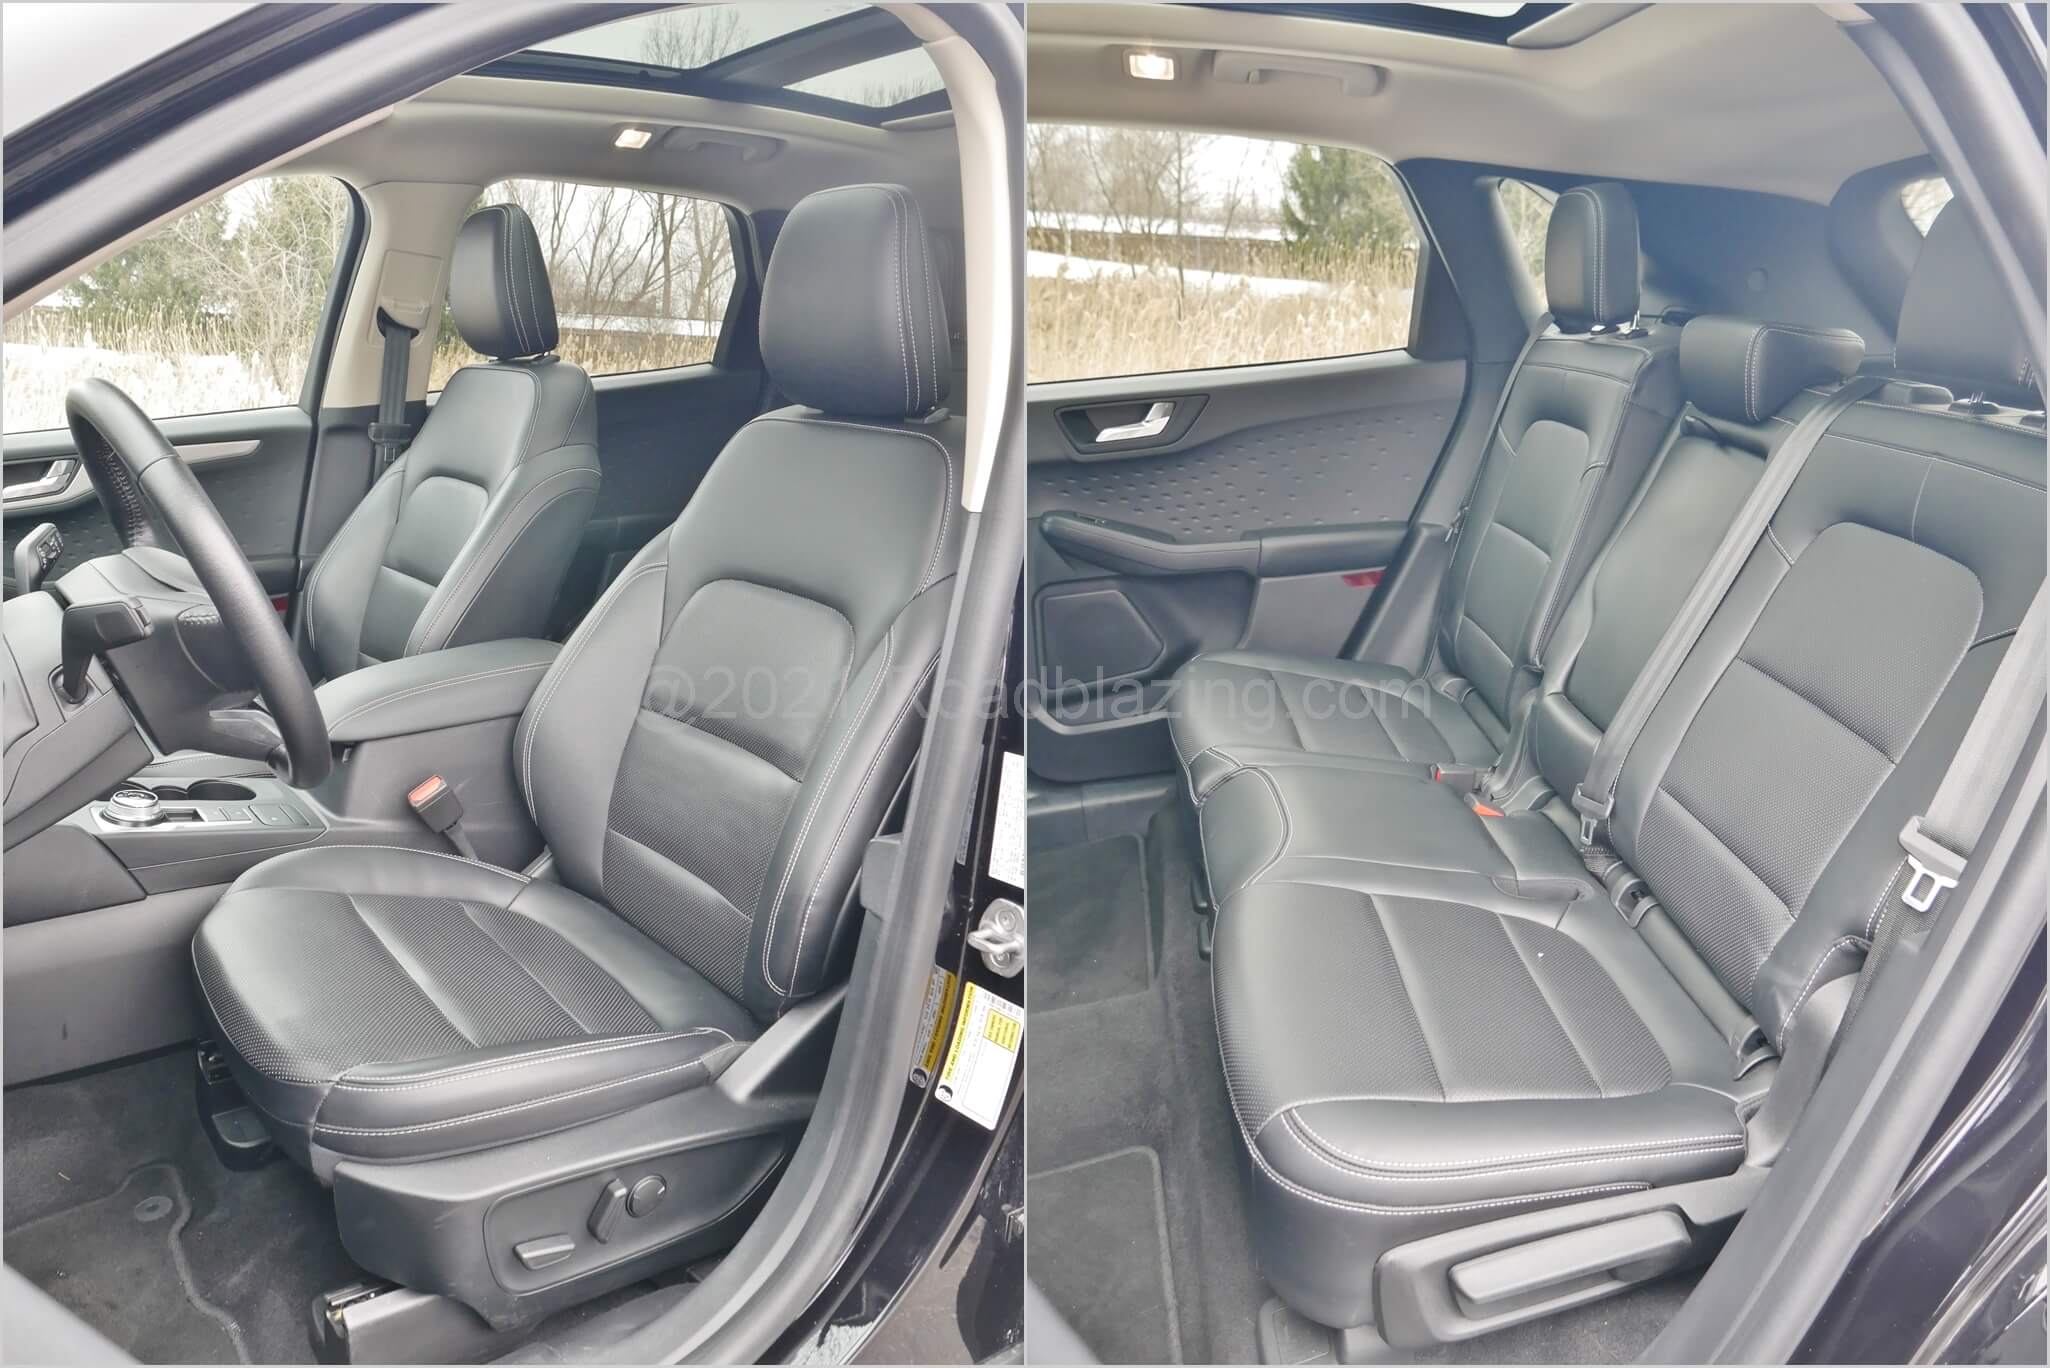 2020 Ford Escape SE Hybrid AWD: ActiveX seat surfaces accurately simulate leather w/ good articulation & 2nd Row seat back recline